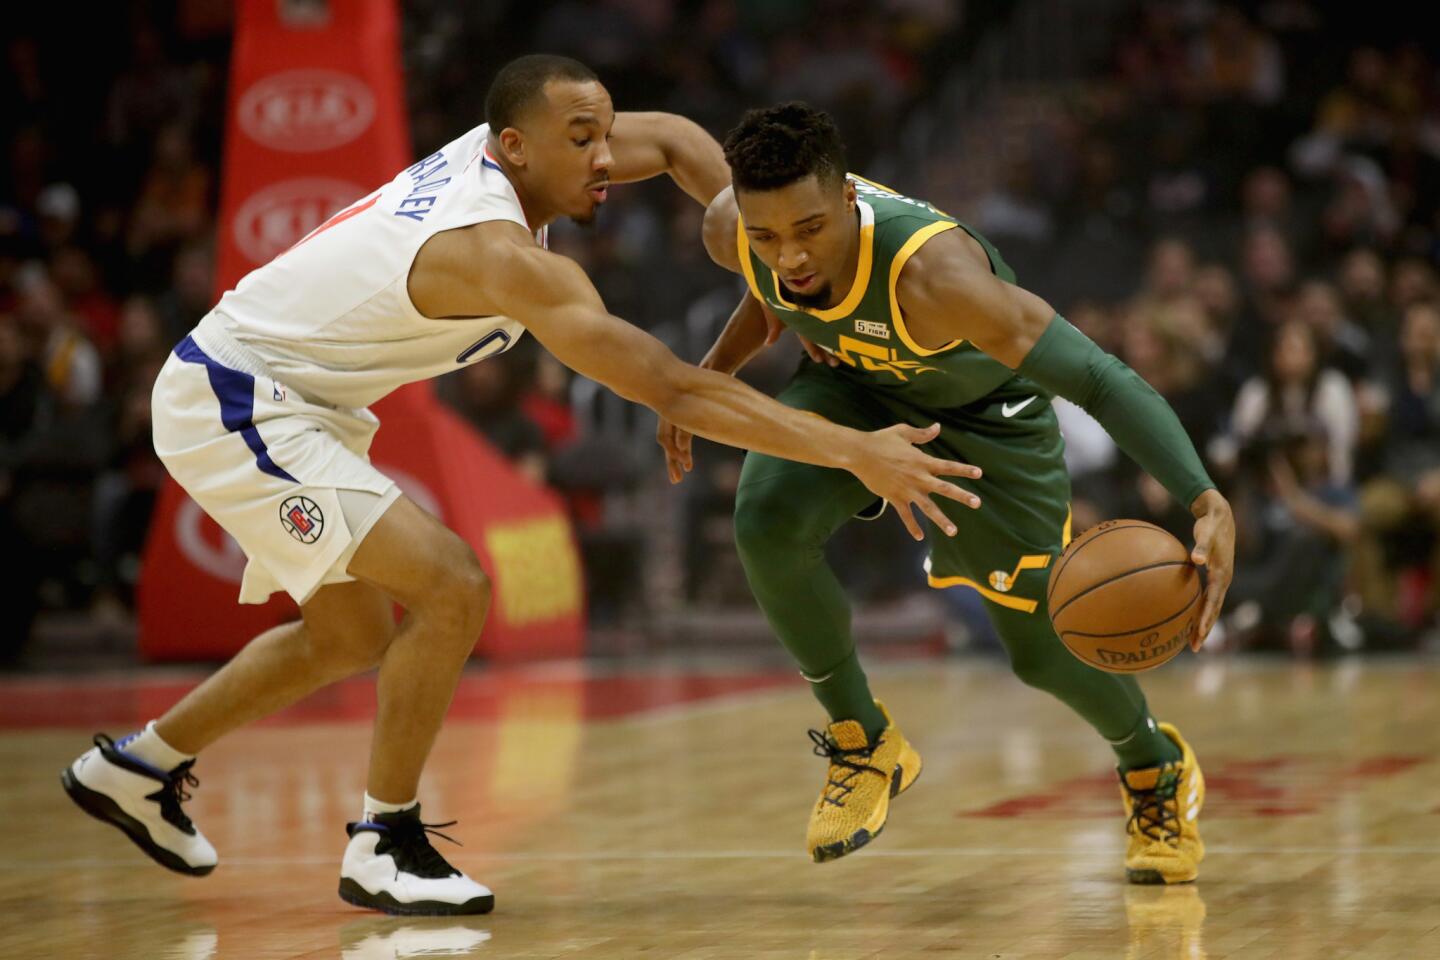 LOS ANGELES, CA - JANUARY 16: Avery Bradley #11 of the Los Angeles Clippers defends agains the dribble of Donovan Mitchell #45 of the Utah Jazz during the first half of a game at Staples Center on January 16, 2019 in Los Angeles, California. NOTE TO USER: User expressly acknowledges and agrees that, by downloading and or using this photograph, User is consenting to the terms and conditions of the Getty Images License Agreement. (Photo by Sean M. Haffey/Getty Images) ** OUTS - ELSENT, FPG, CM - OUTS * NM, PH, VA if sourced by CT, LA or MoD **